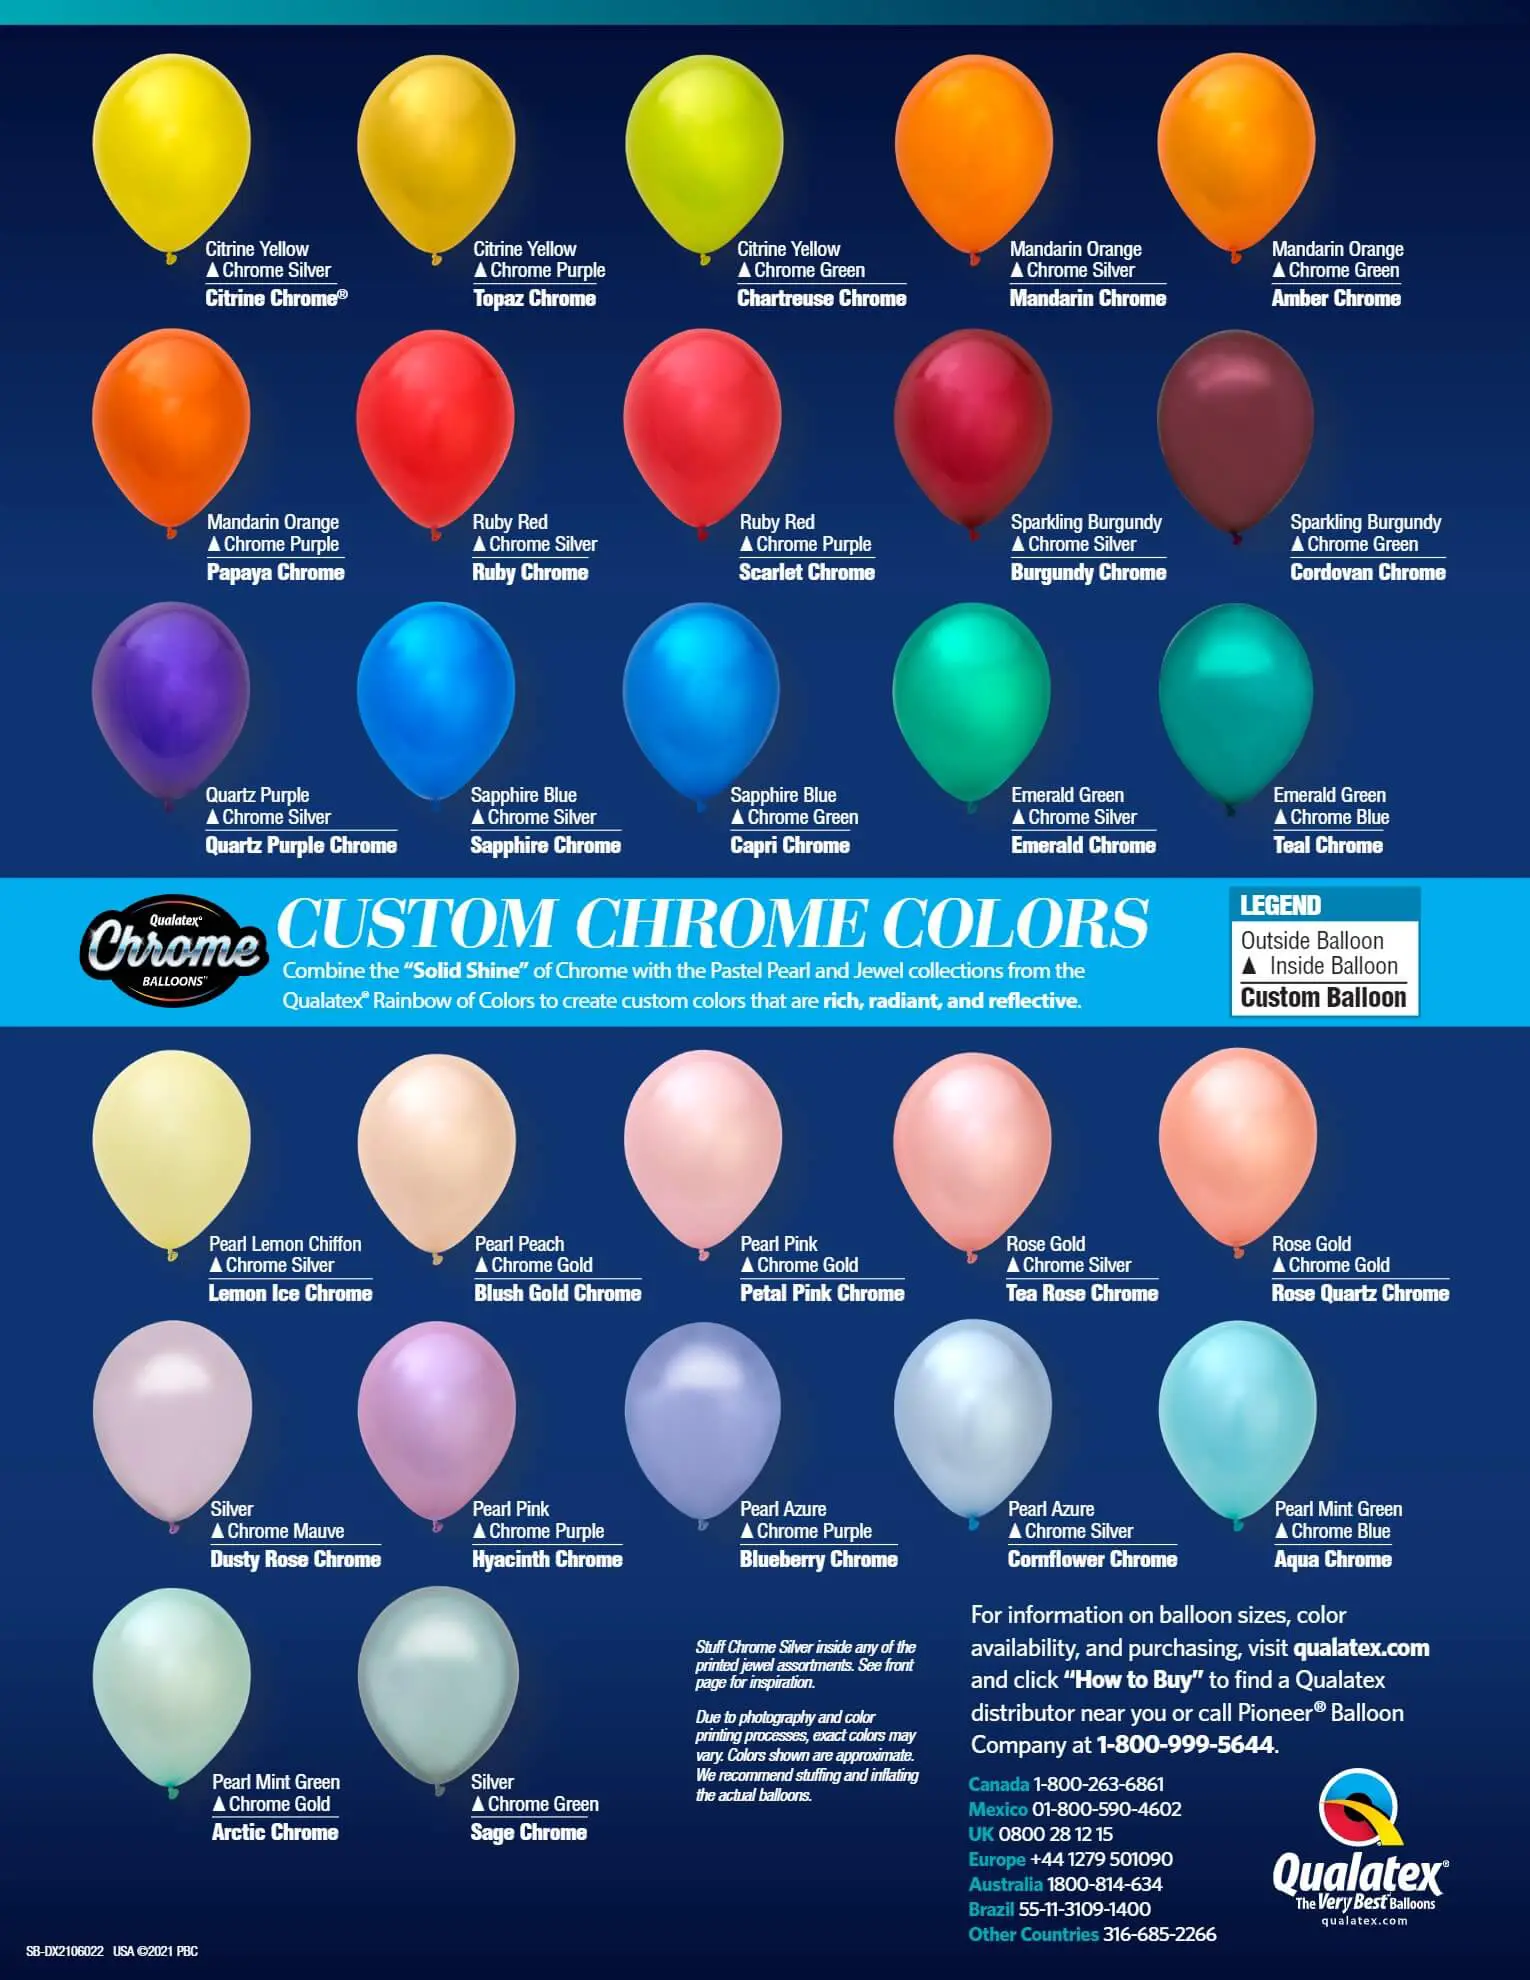 A color chart displaying various shades of latex balloons, with color swatches and custom chrome colors.